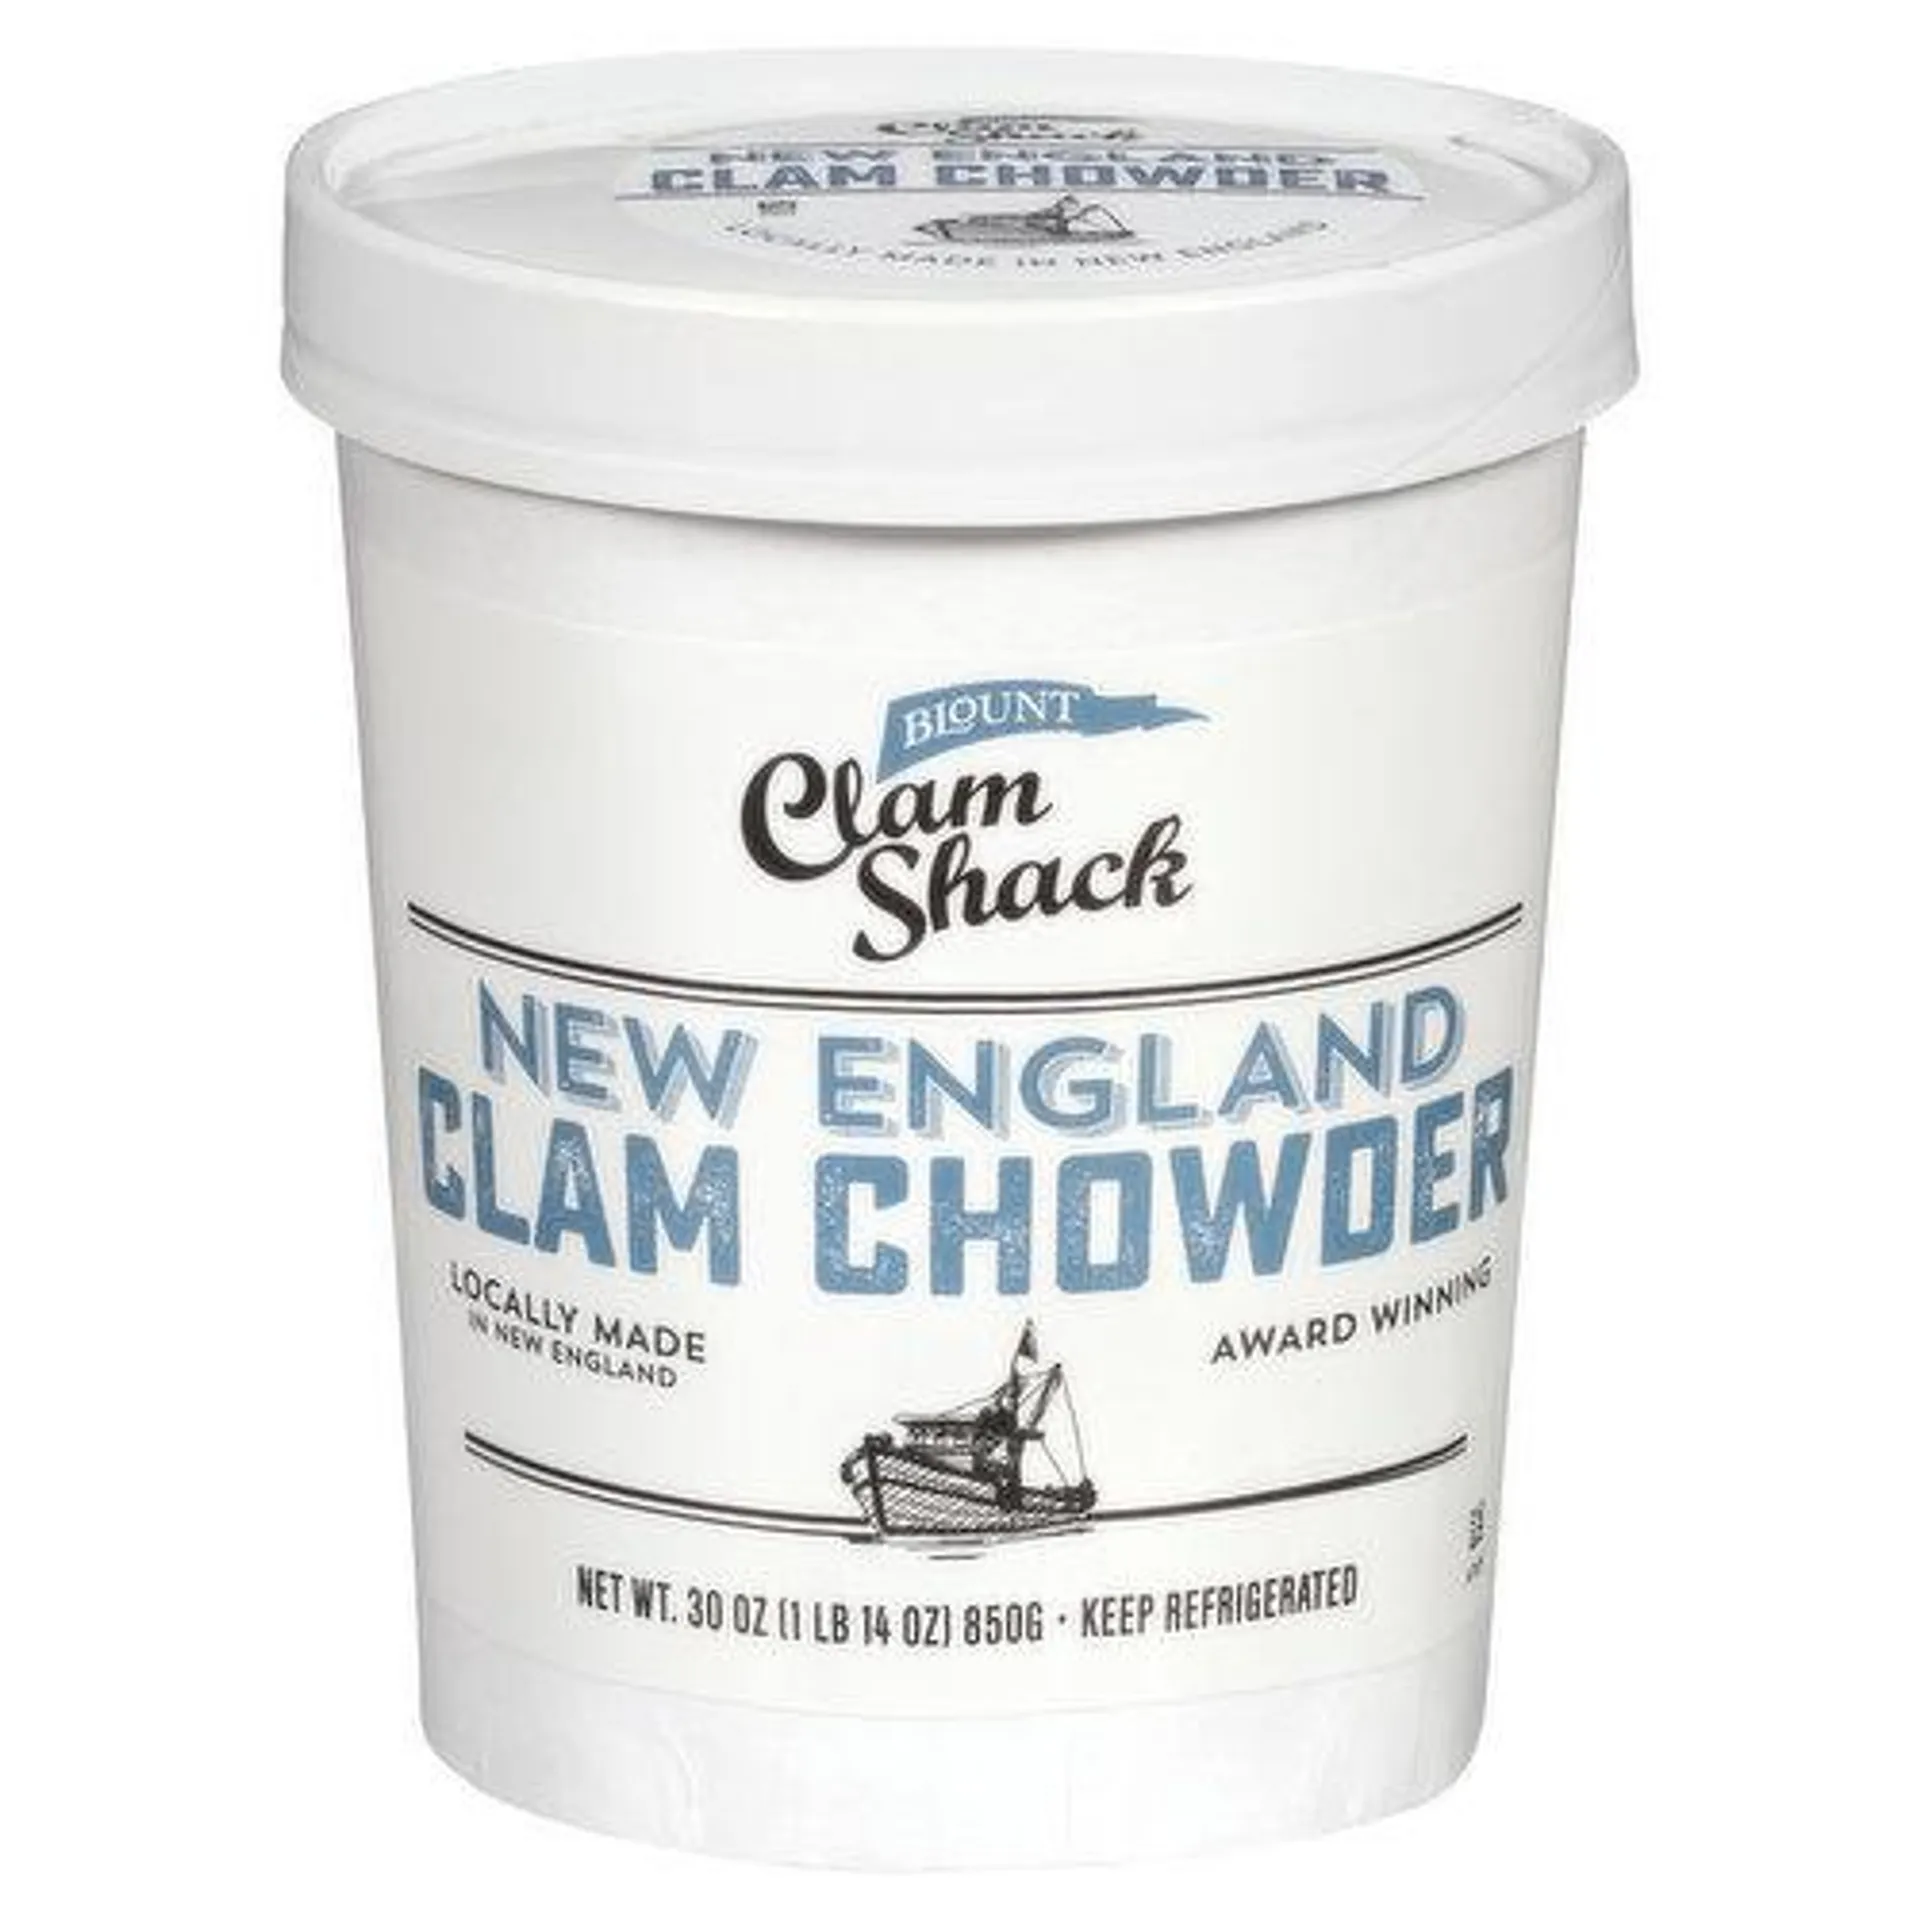 Blount Clam Shack Blount Clam Shack Gluten Free New England Clam Chowder, Soup, 30 OZ Bag-In-Cup - 30 Ounce